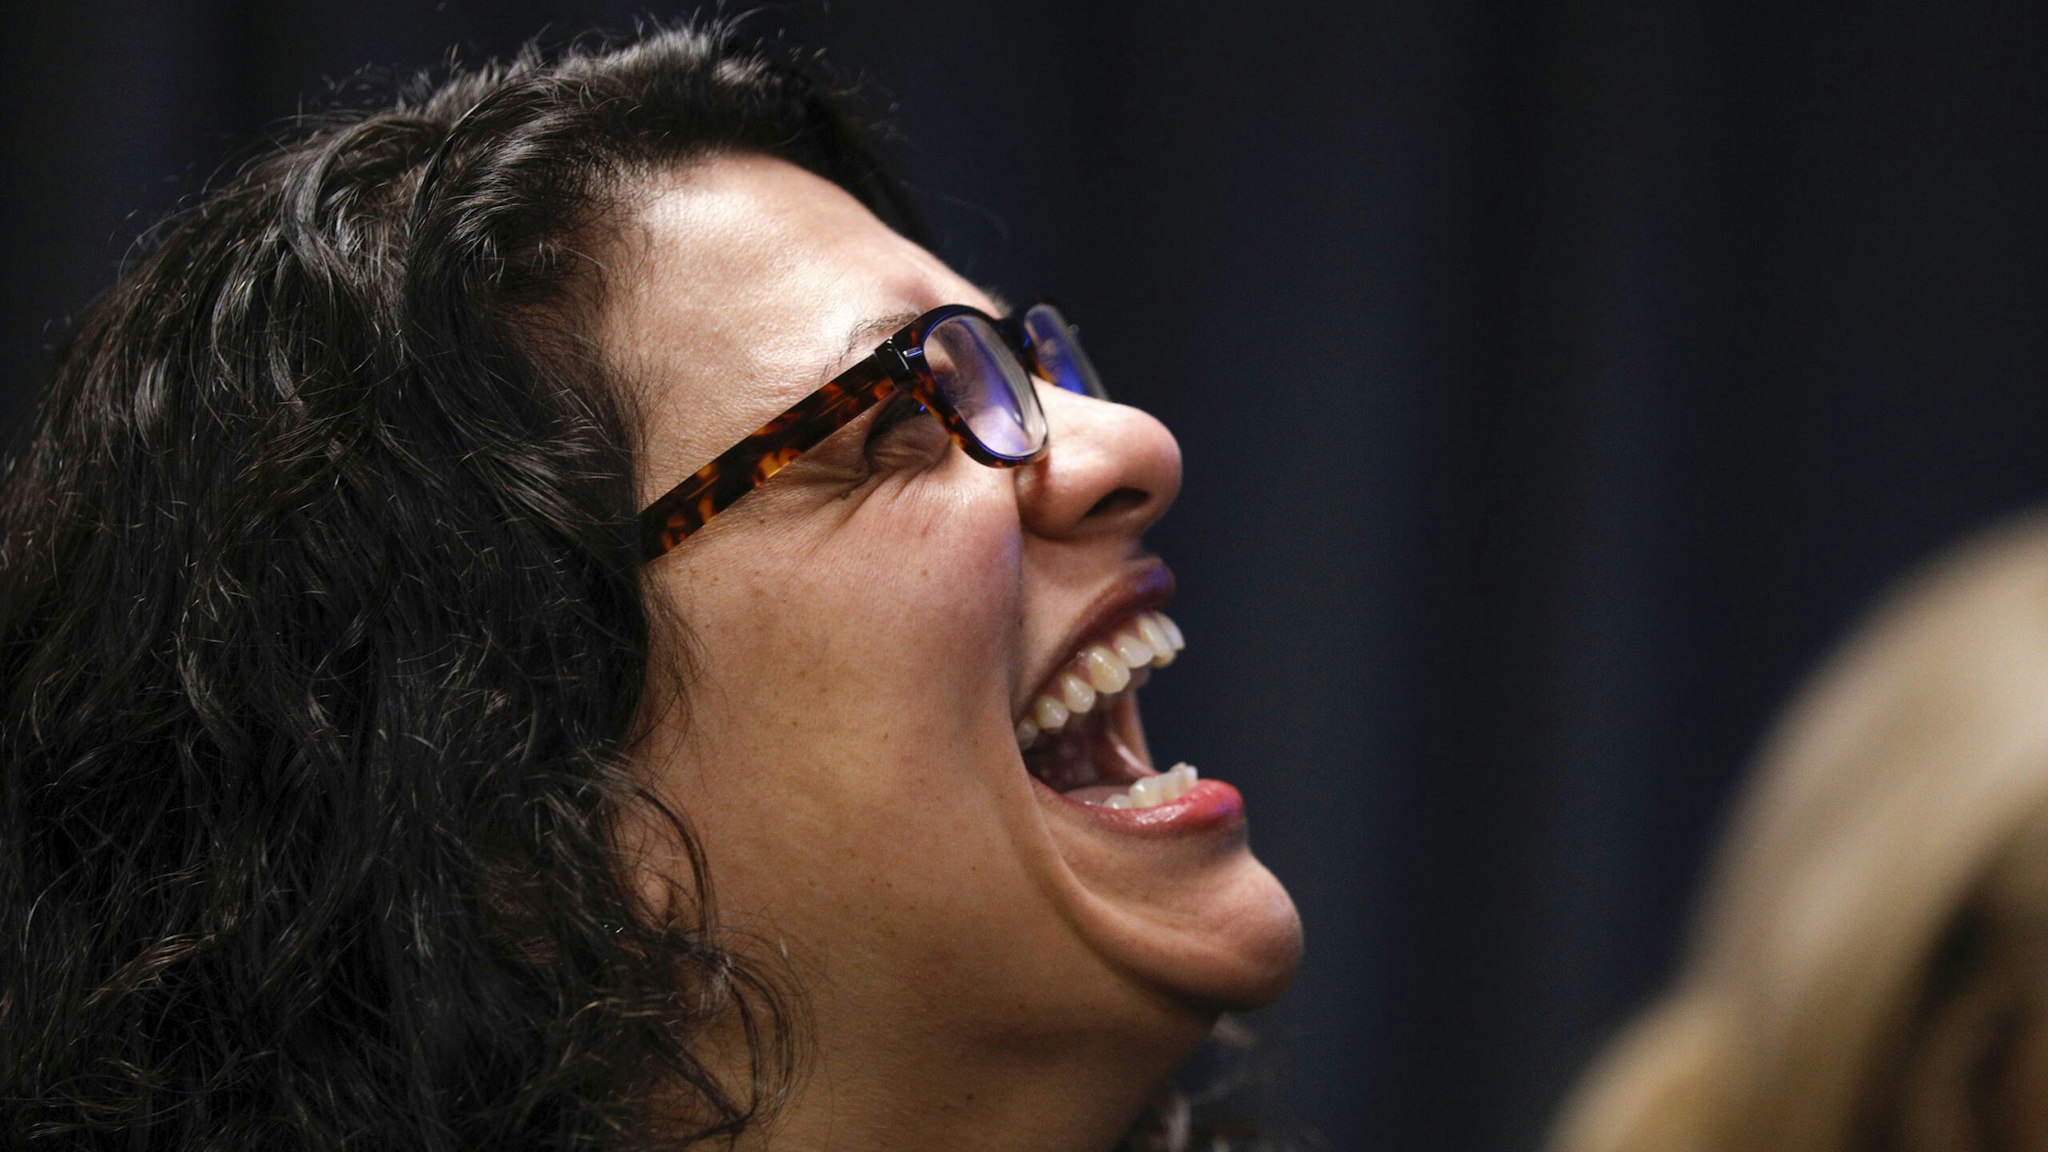 HAMTRAMCK, MI - JANUARY 27: U.S. Representative Rashida Tlaib (D-MI) attends an event where General Motors announced that GMs Detroit-Hamtramck Assembly plant will build the all-electric Cruise Origin self-driving shuttle on January 27, 2020 in Hamtramck, Michigan. GM will invest $2.2 billion at the Detroit-Hamtramck plant and 2200 jobs for an all-electric future for electric pickups, SUVs, and autonomous vehicles.